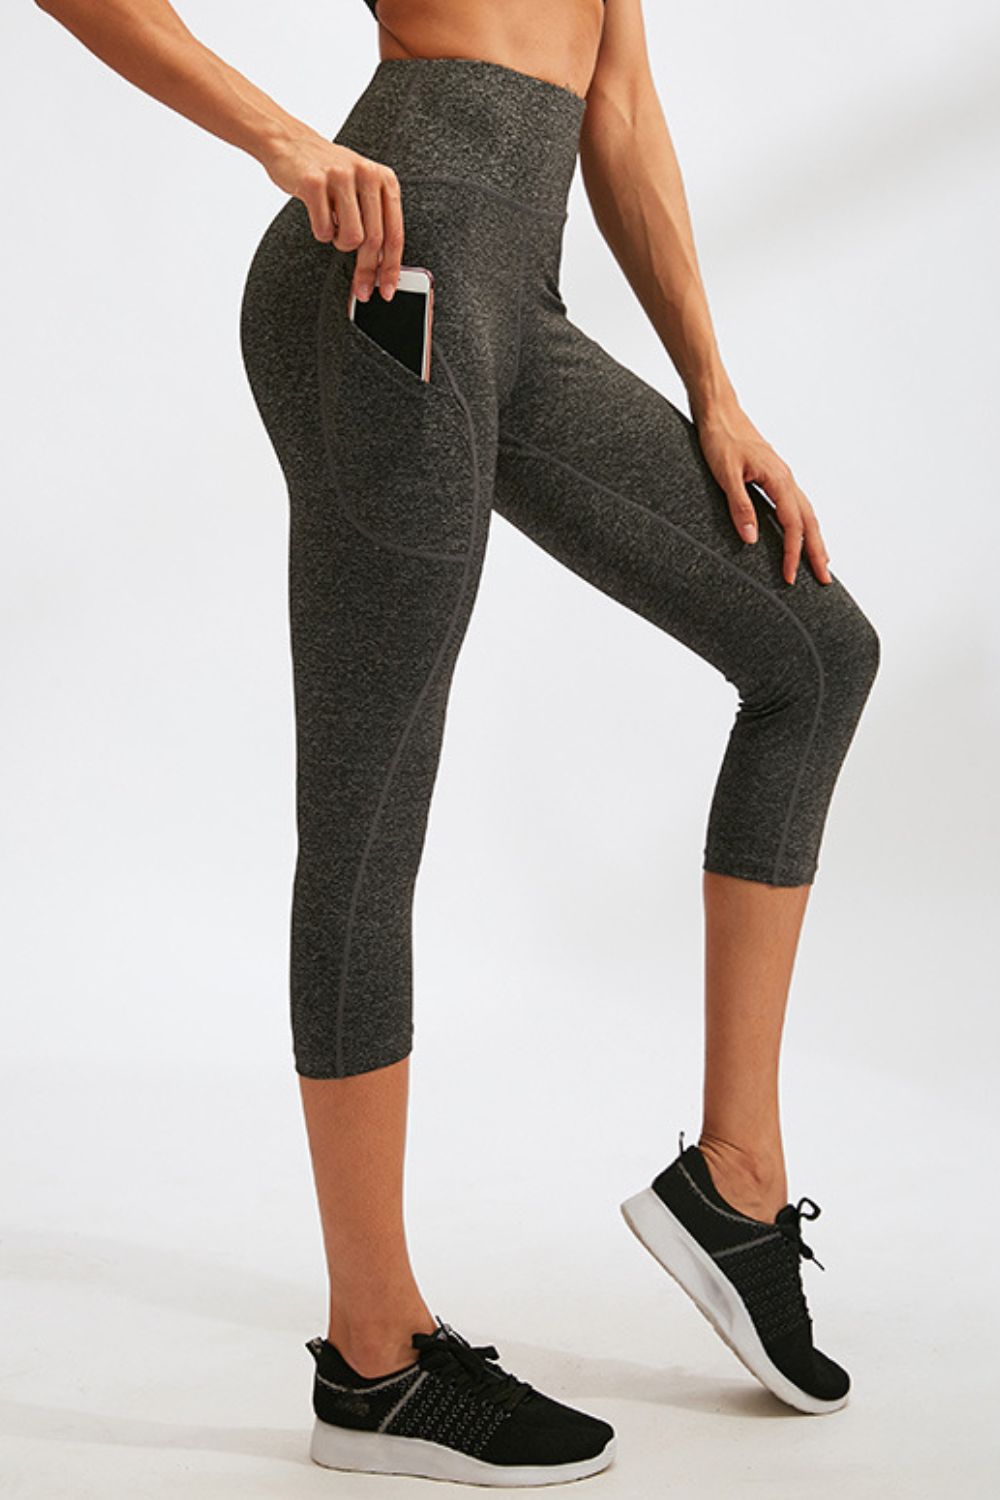 Buy AGILE WEAR Skinny Fit Ankle Length Leggings with Waist Band